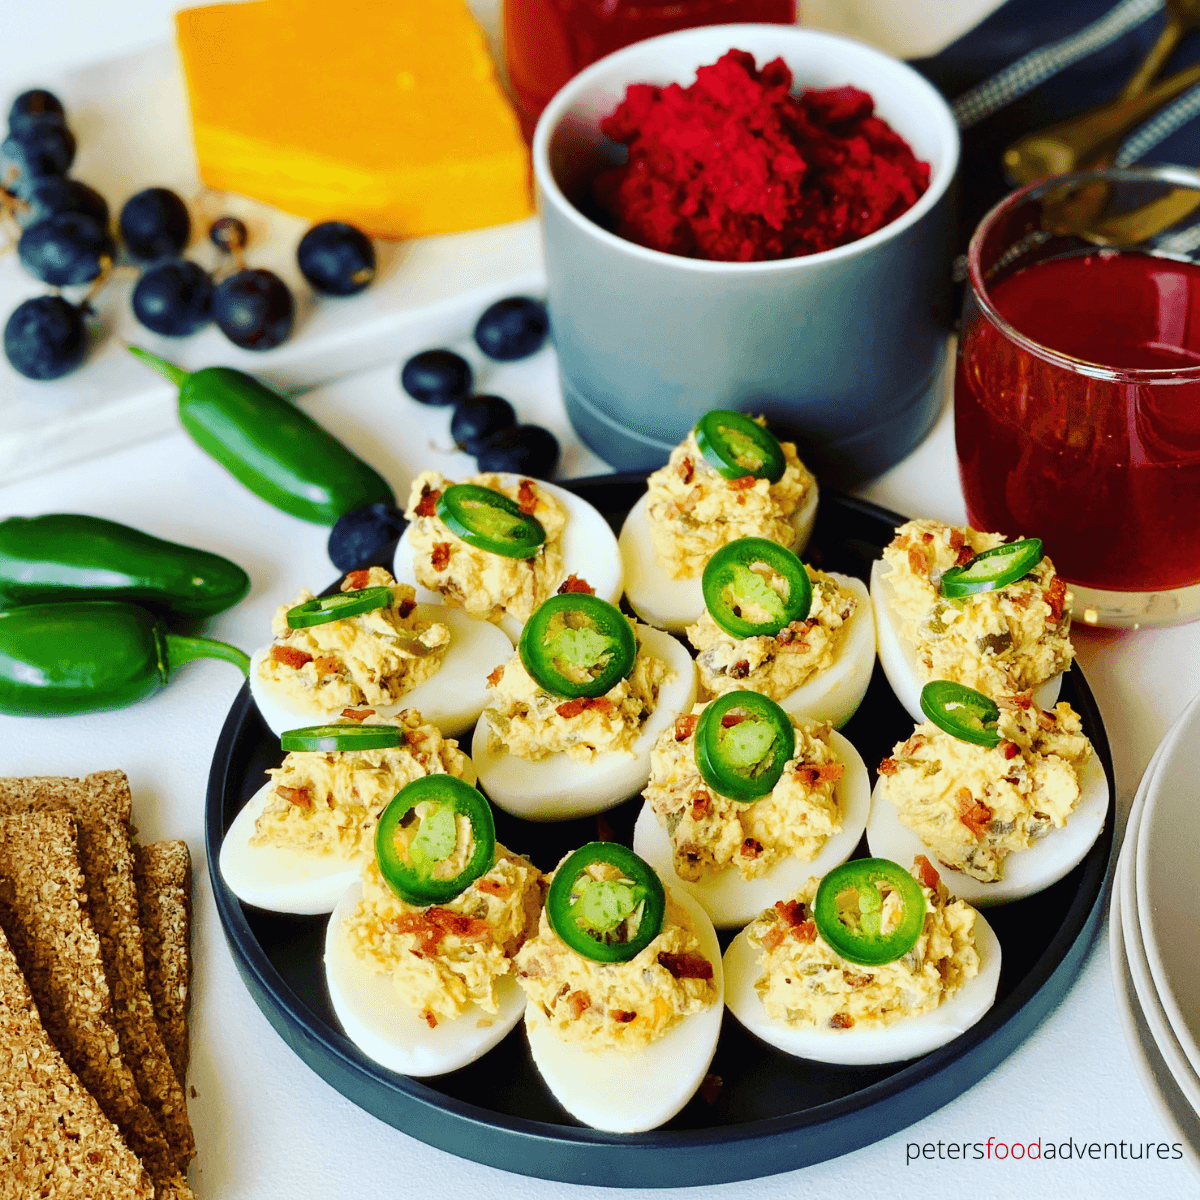 Jalapeno Popper Deviled Eggs are a low carb appetizer that everyone will love. Stuffed with cream cheese, bacon, cheddar and 3 types of jalapenos. These spicy devilled eggs pack a punch! The perfect appetizer for Easter, Super Bowl, Christmas or any holiday celebration or potluck.